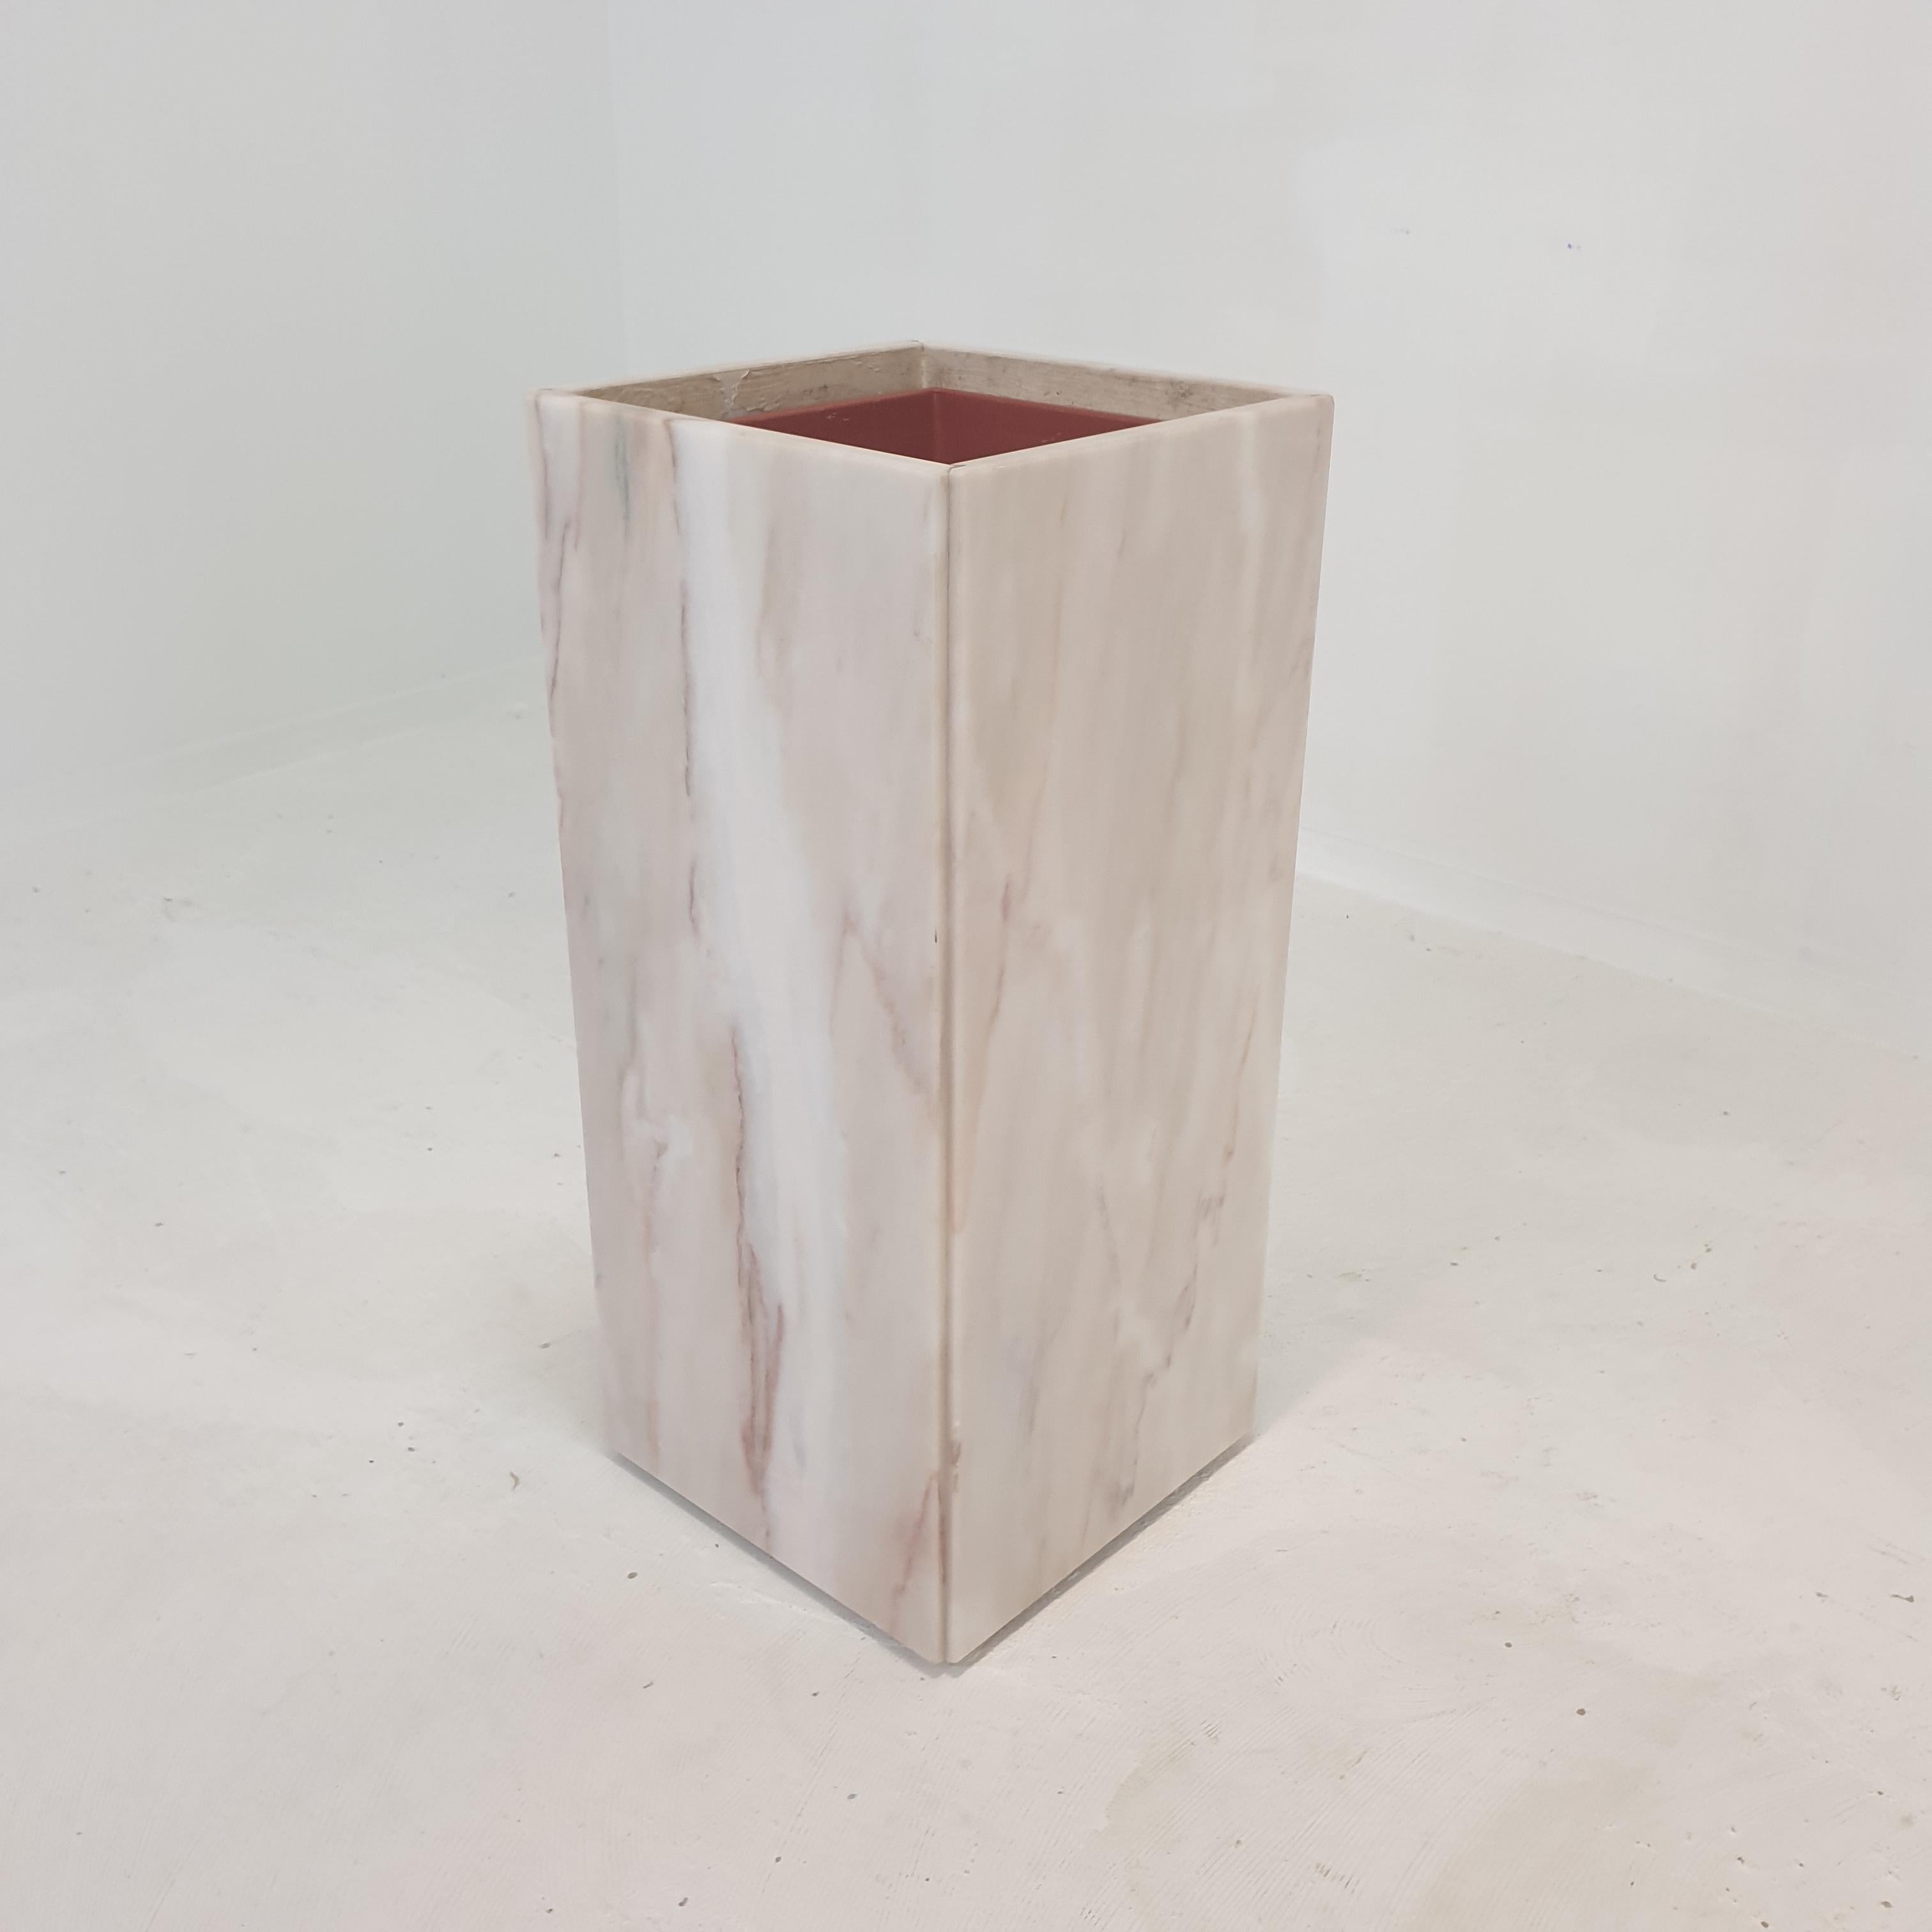 Italian Marble Planter or Pedestal with Light, 1970's For Sale 1